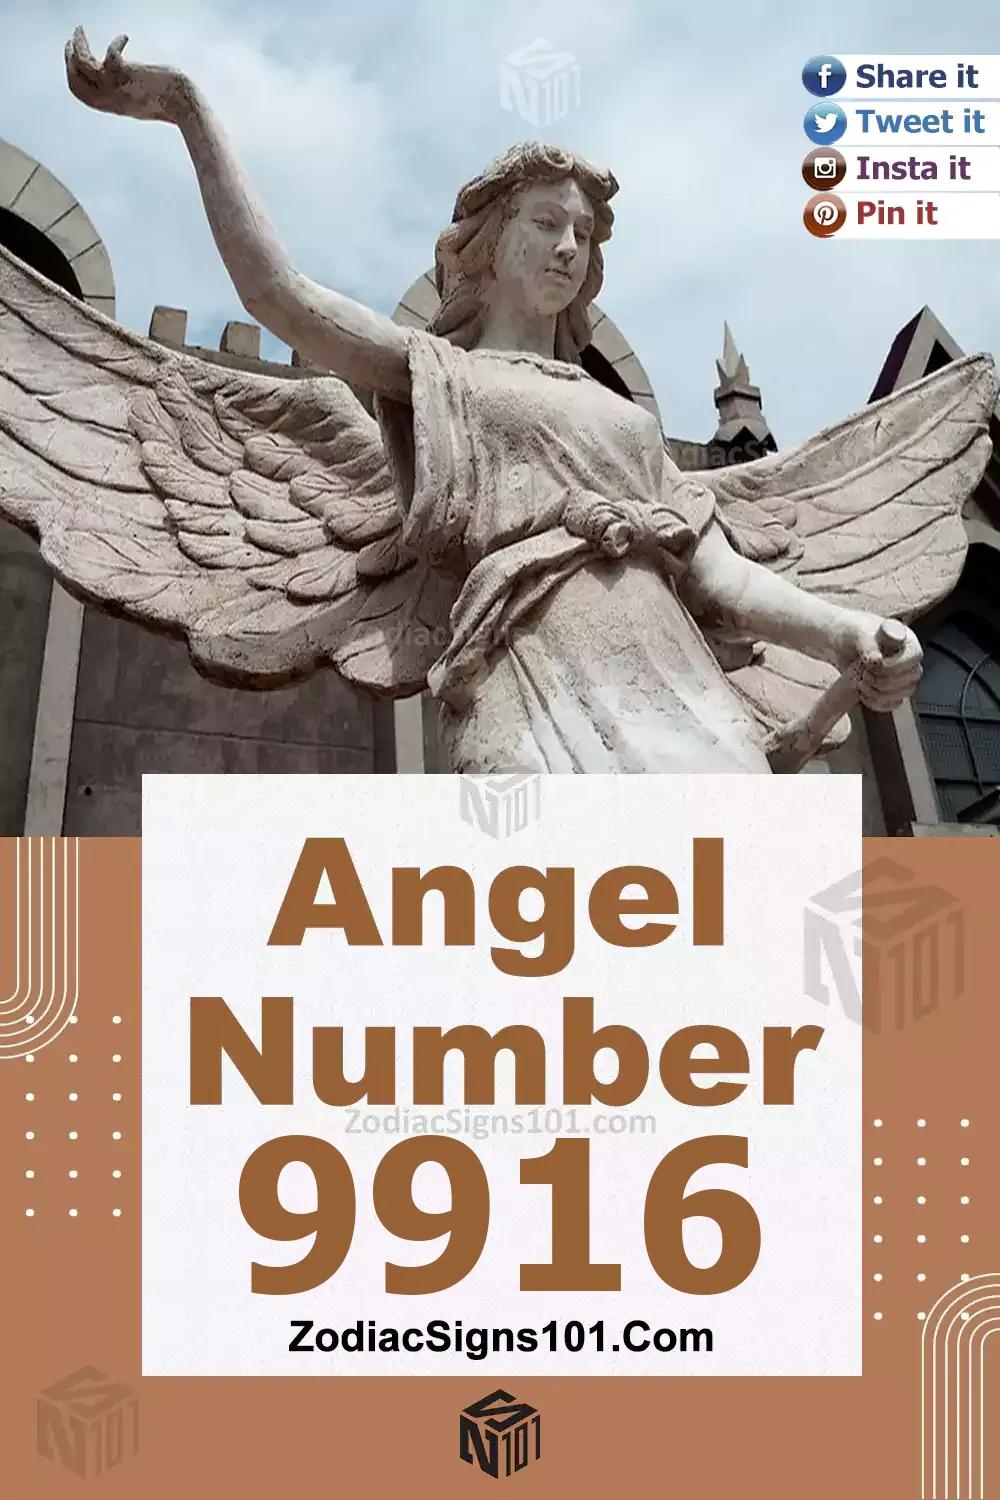 9916 Angel Number Meaning